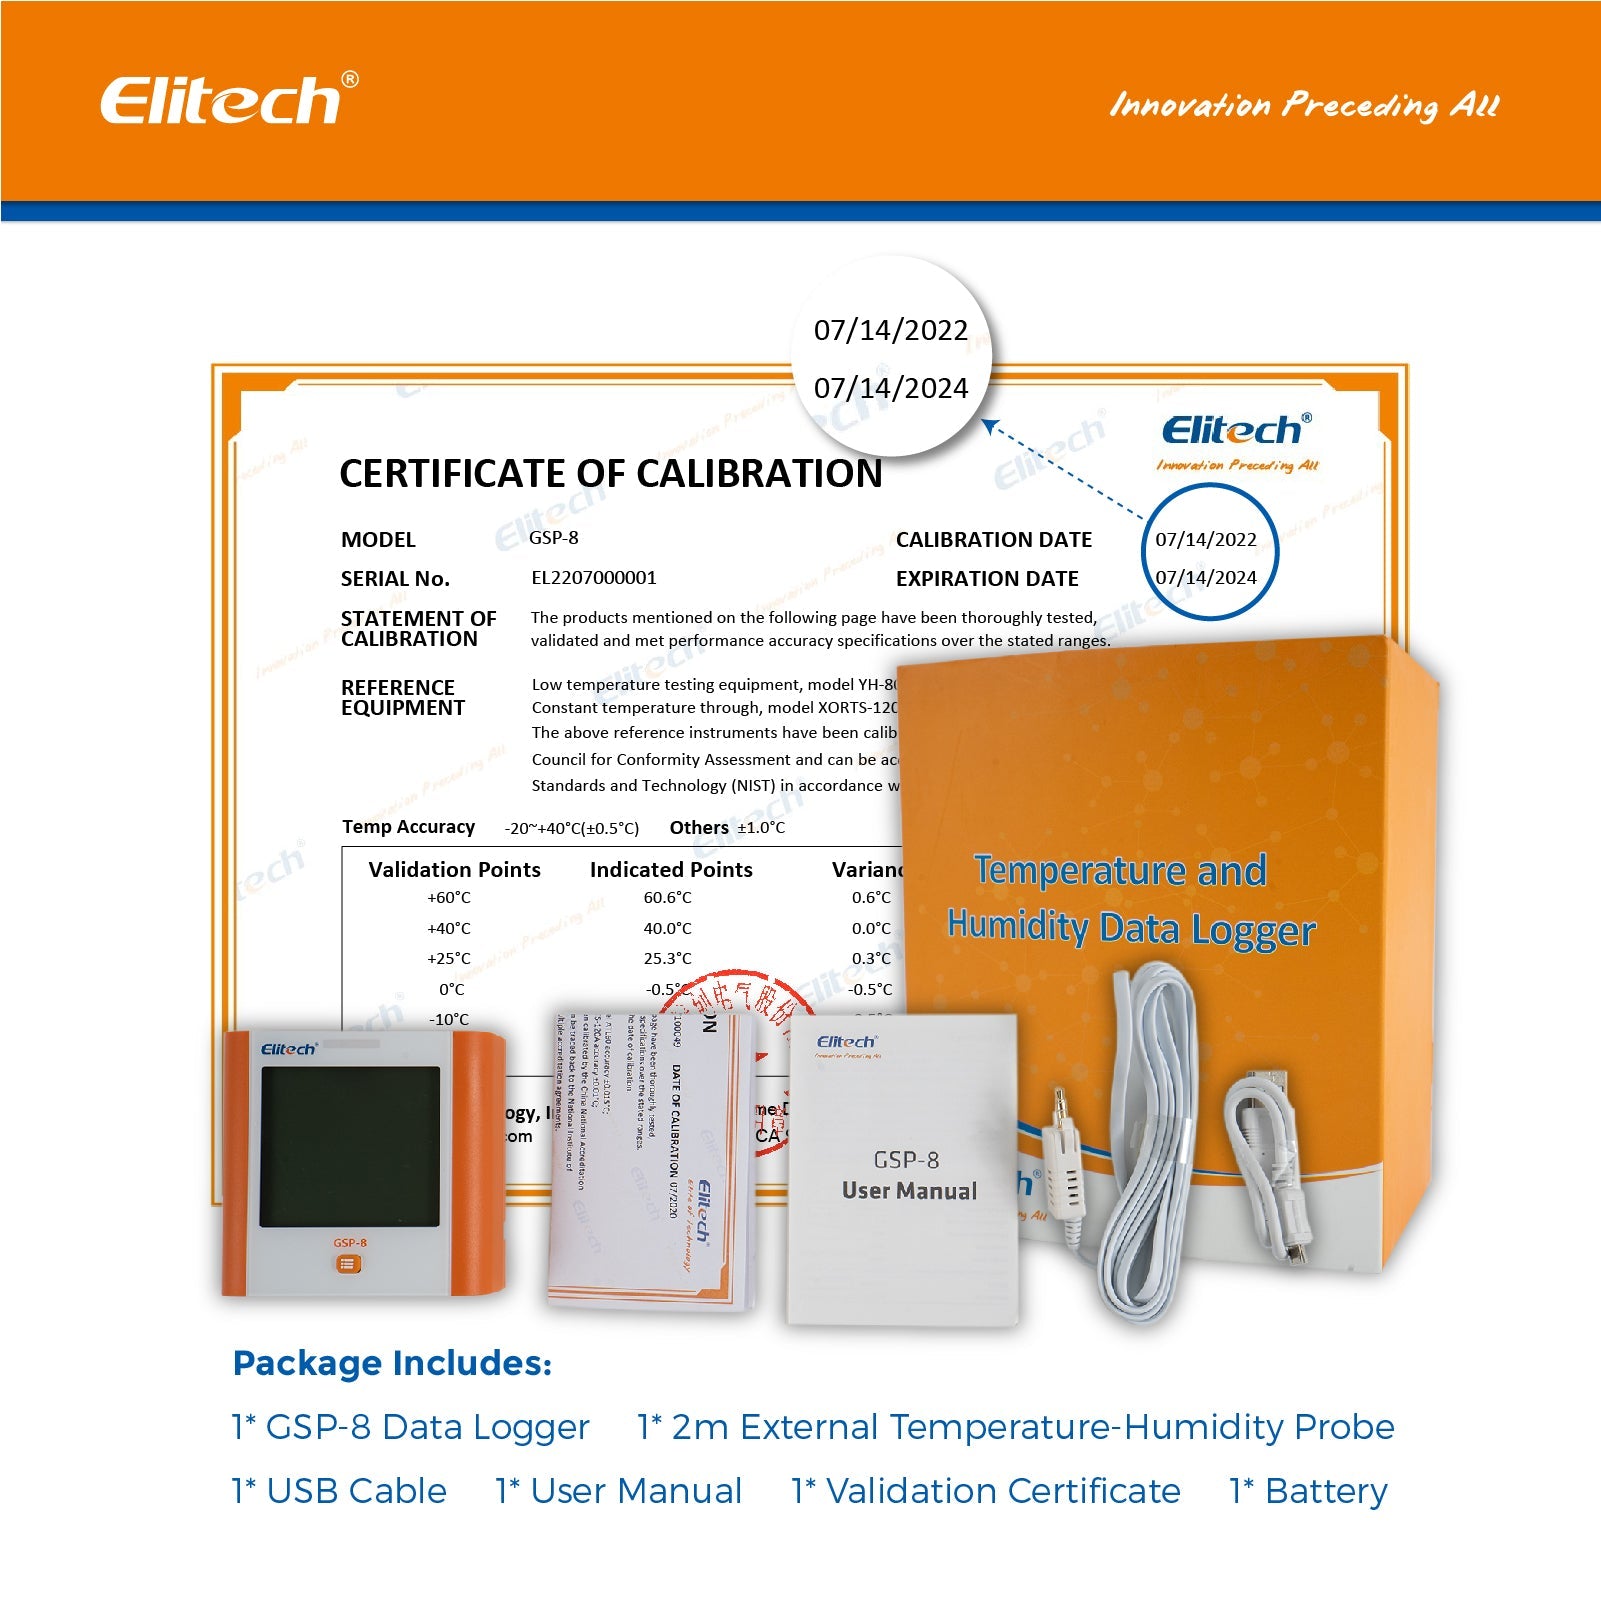 Elitech GSP-8 Wall Mounted Temperature and Humidity Digital Data Logger - Elitech Technology, Inc.